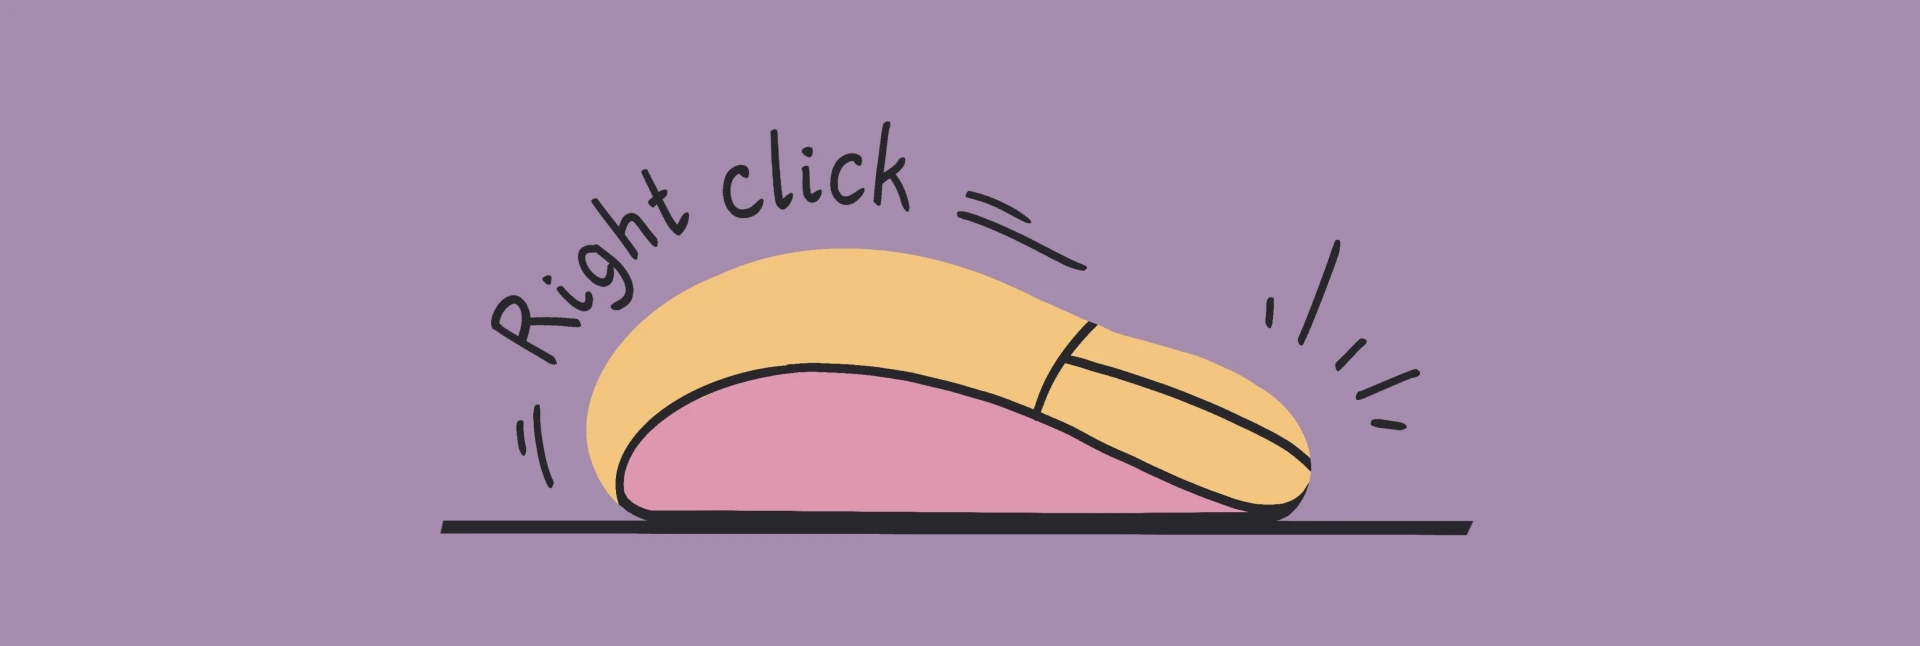 How to Right-Click on a Mac Computer in Three Different Ways